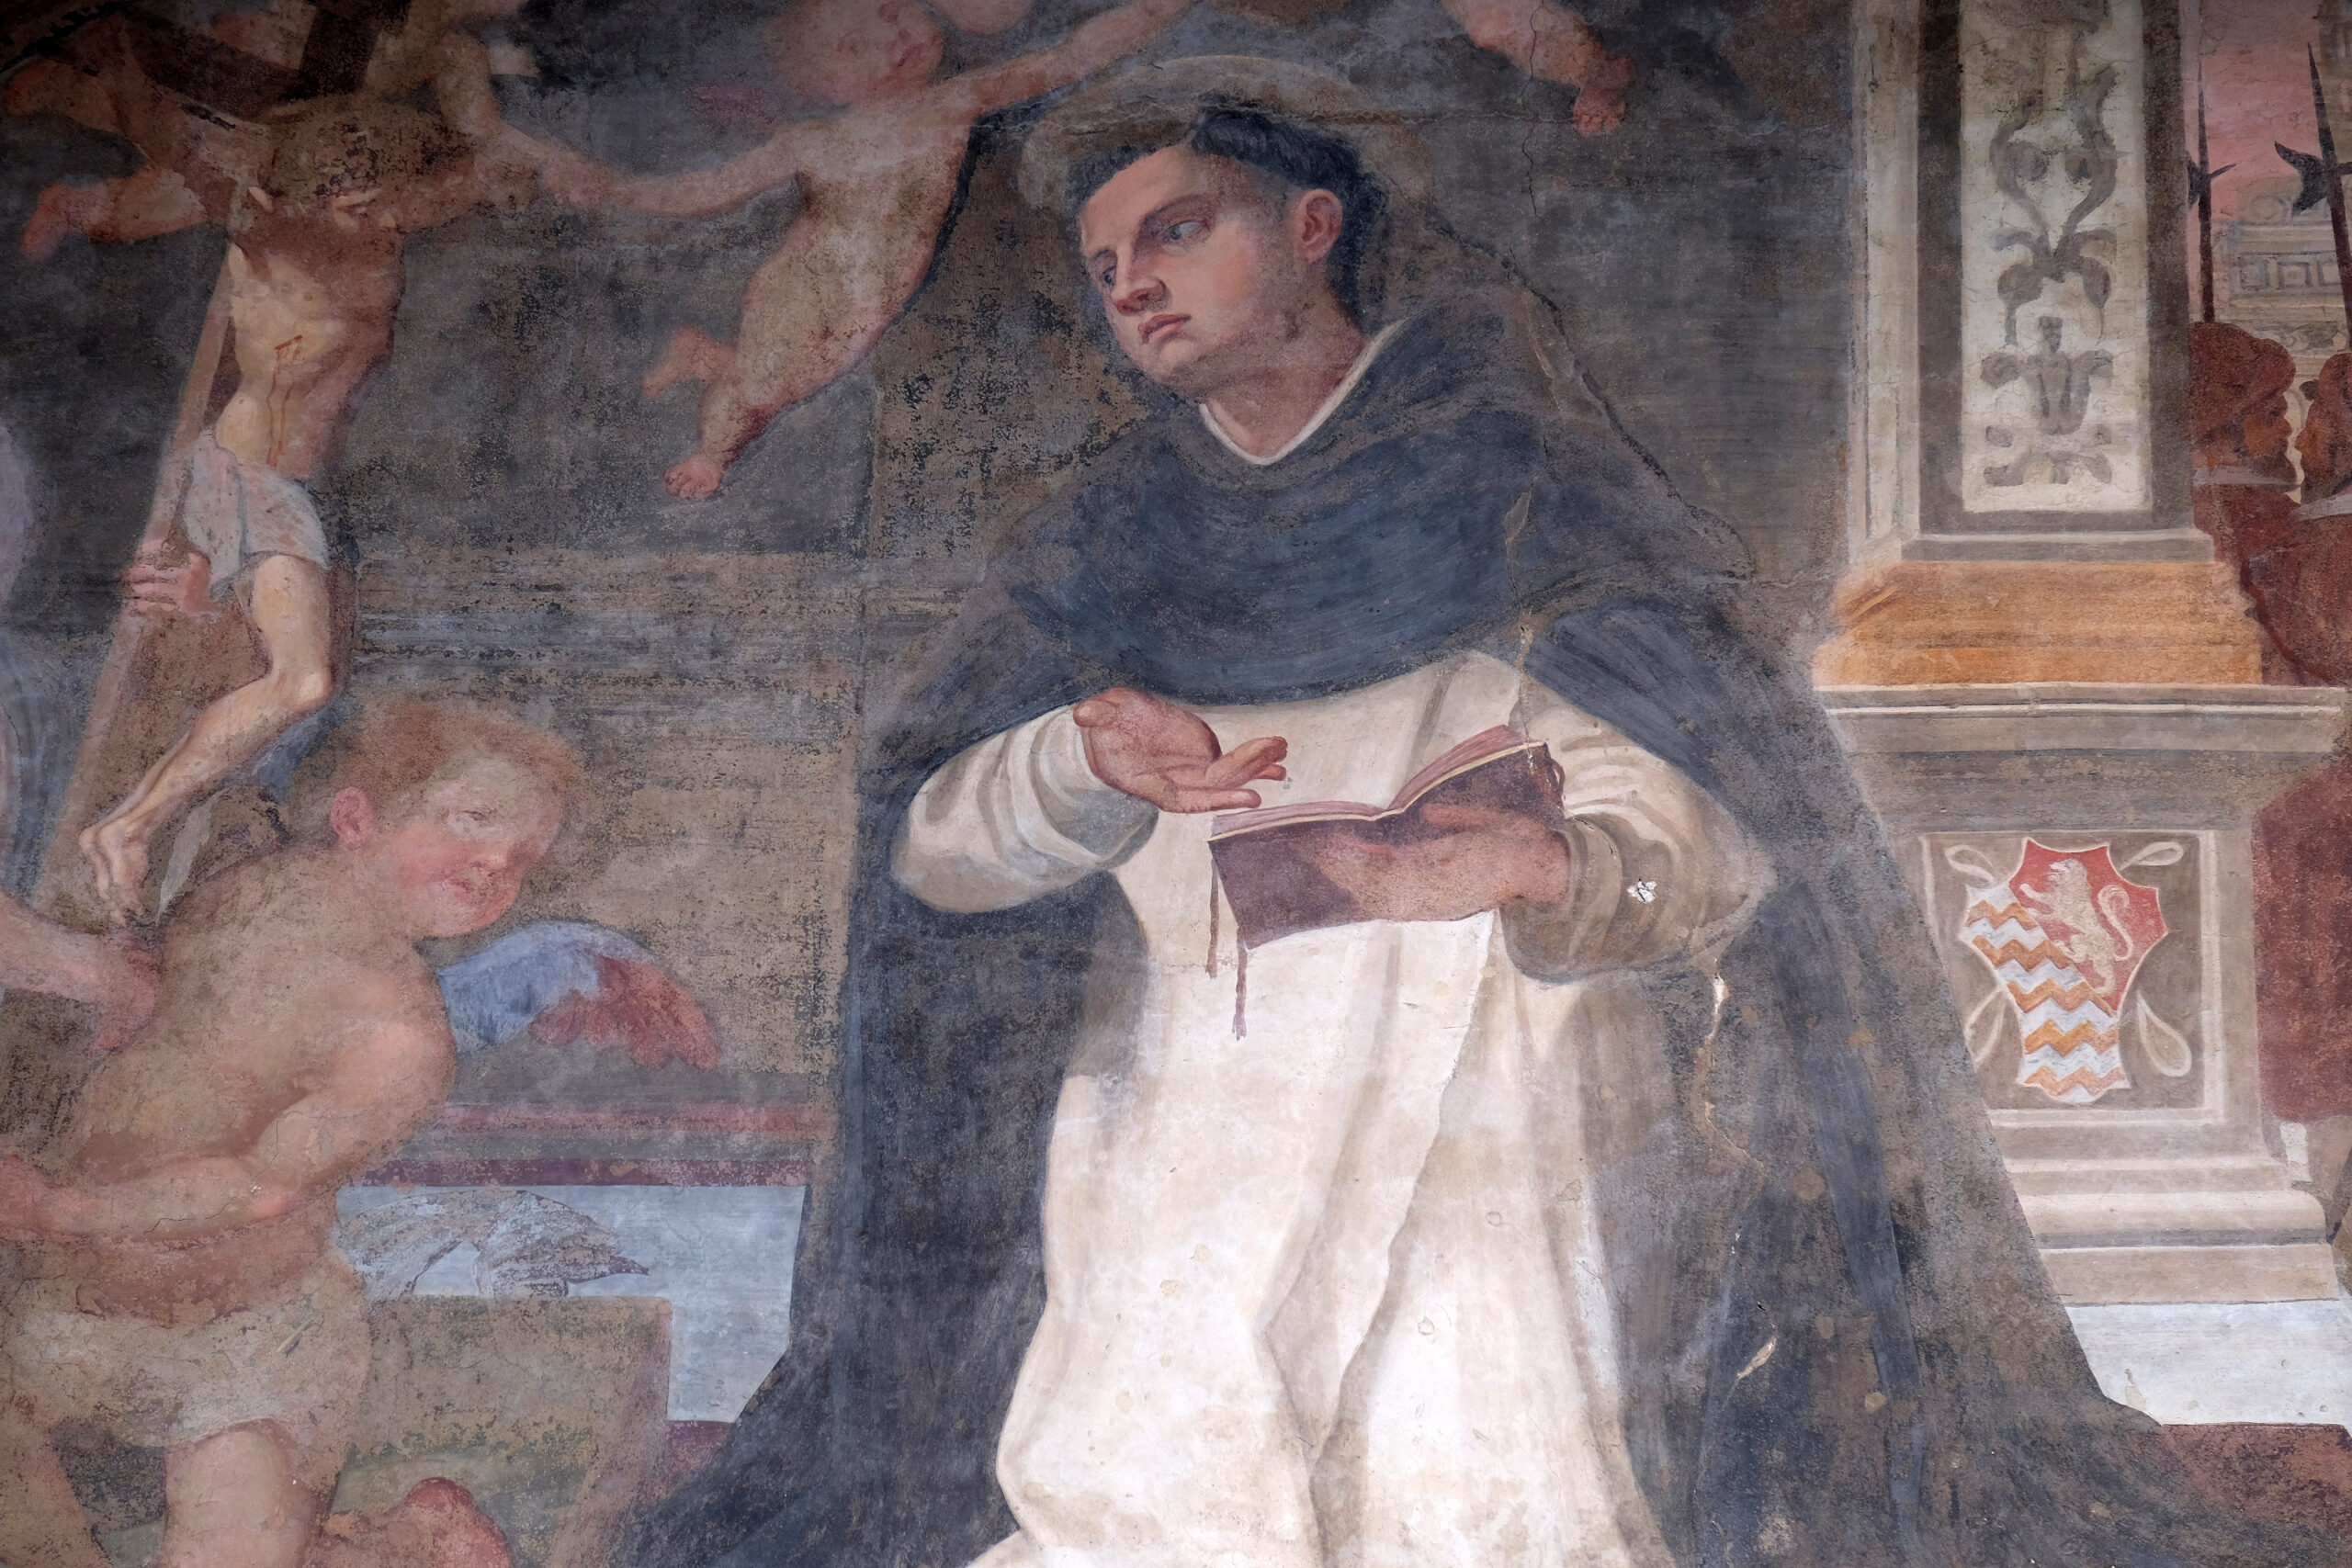 The lunette of one of the side doors depicting St. Thomas Aquinas, detail of the facade of the Church of Santa Maria Novella in Florence, Italy